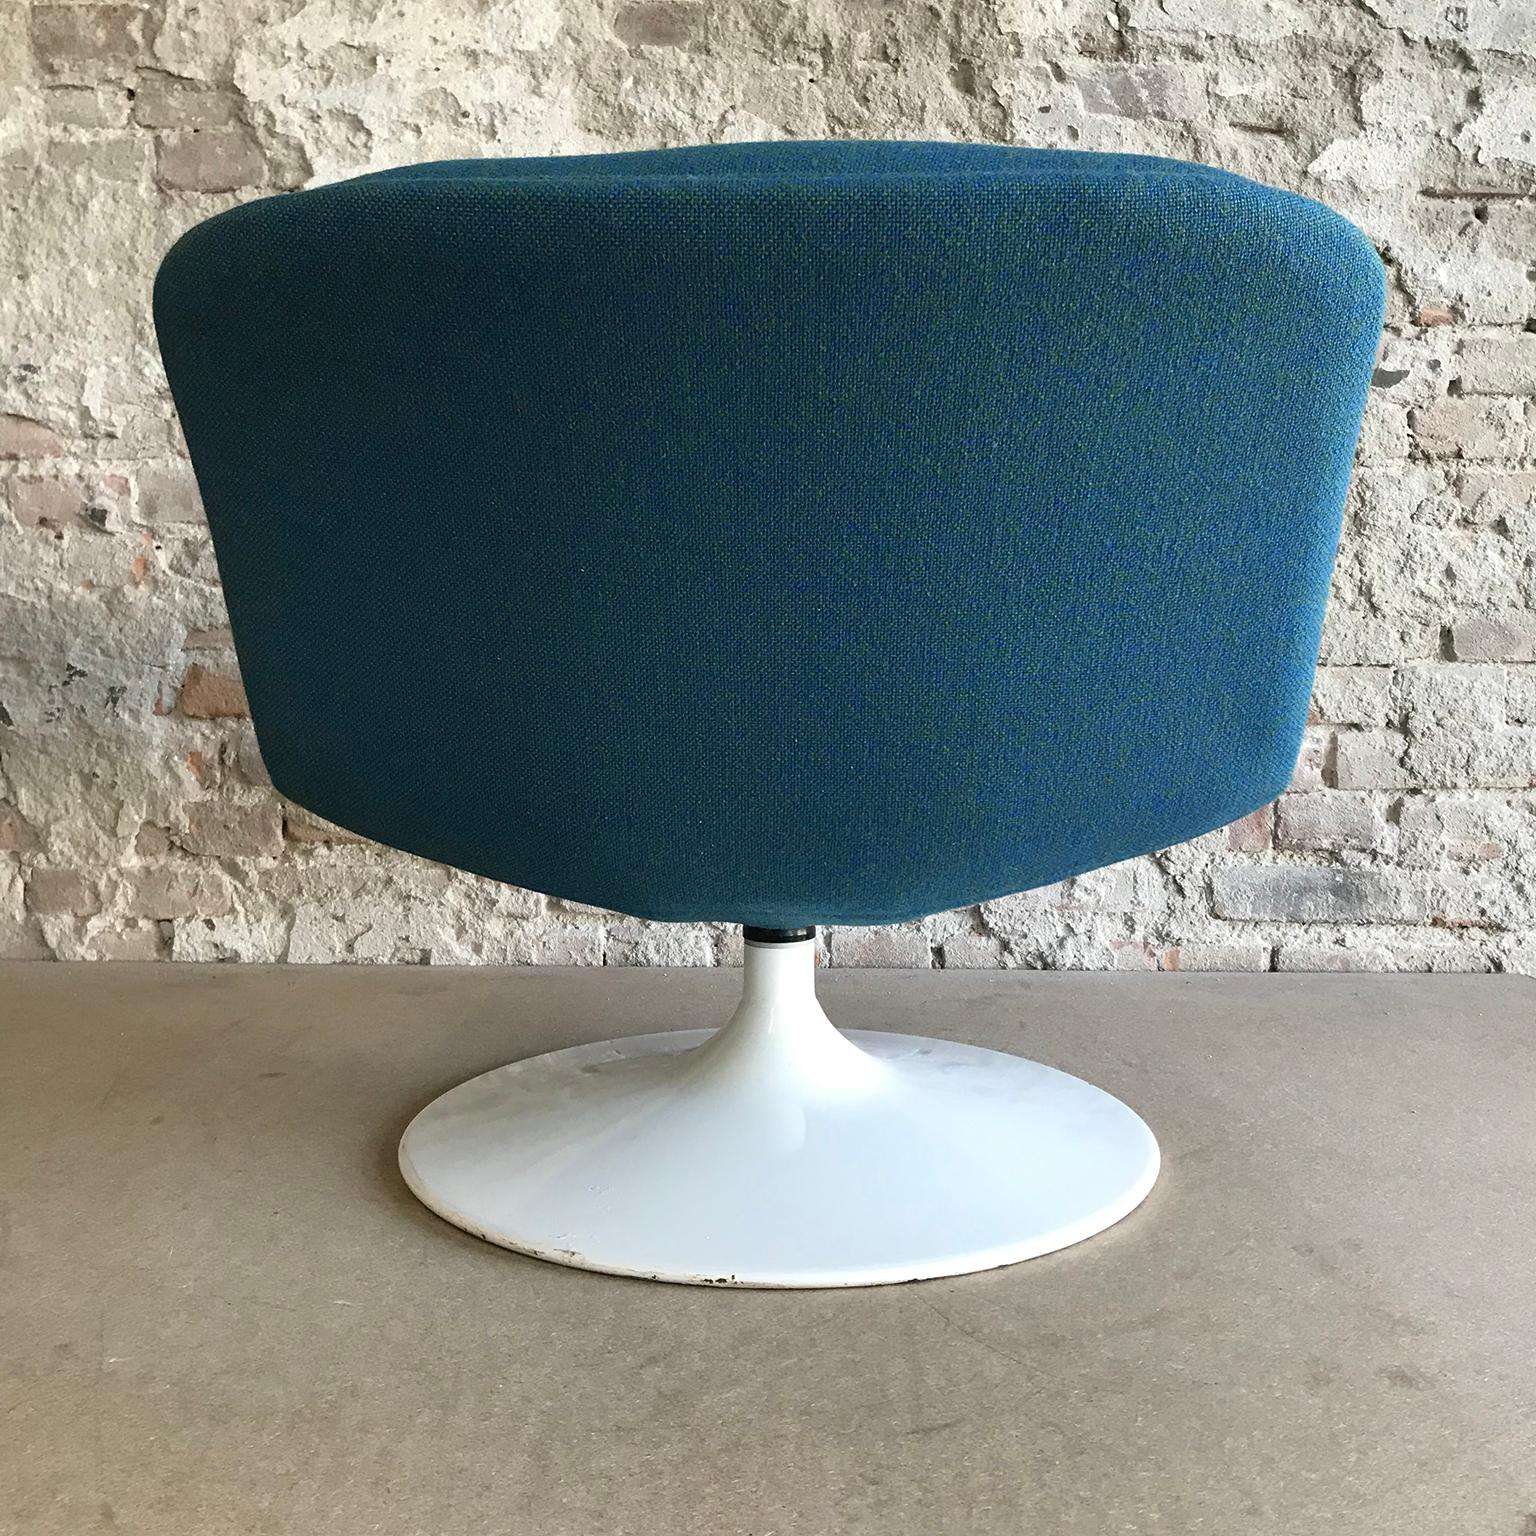 Late 20th Century 1977, Geoffrey Harcourt, Artifort 508 Chair by New Upholstery Blue Green Fabric